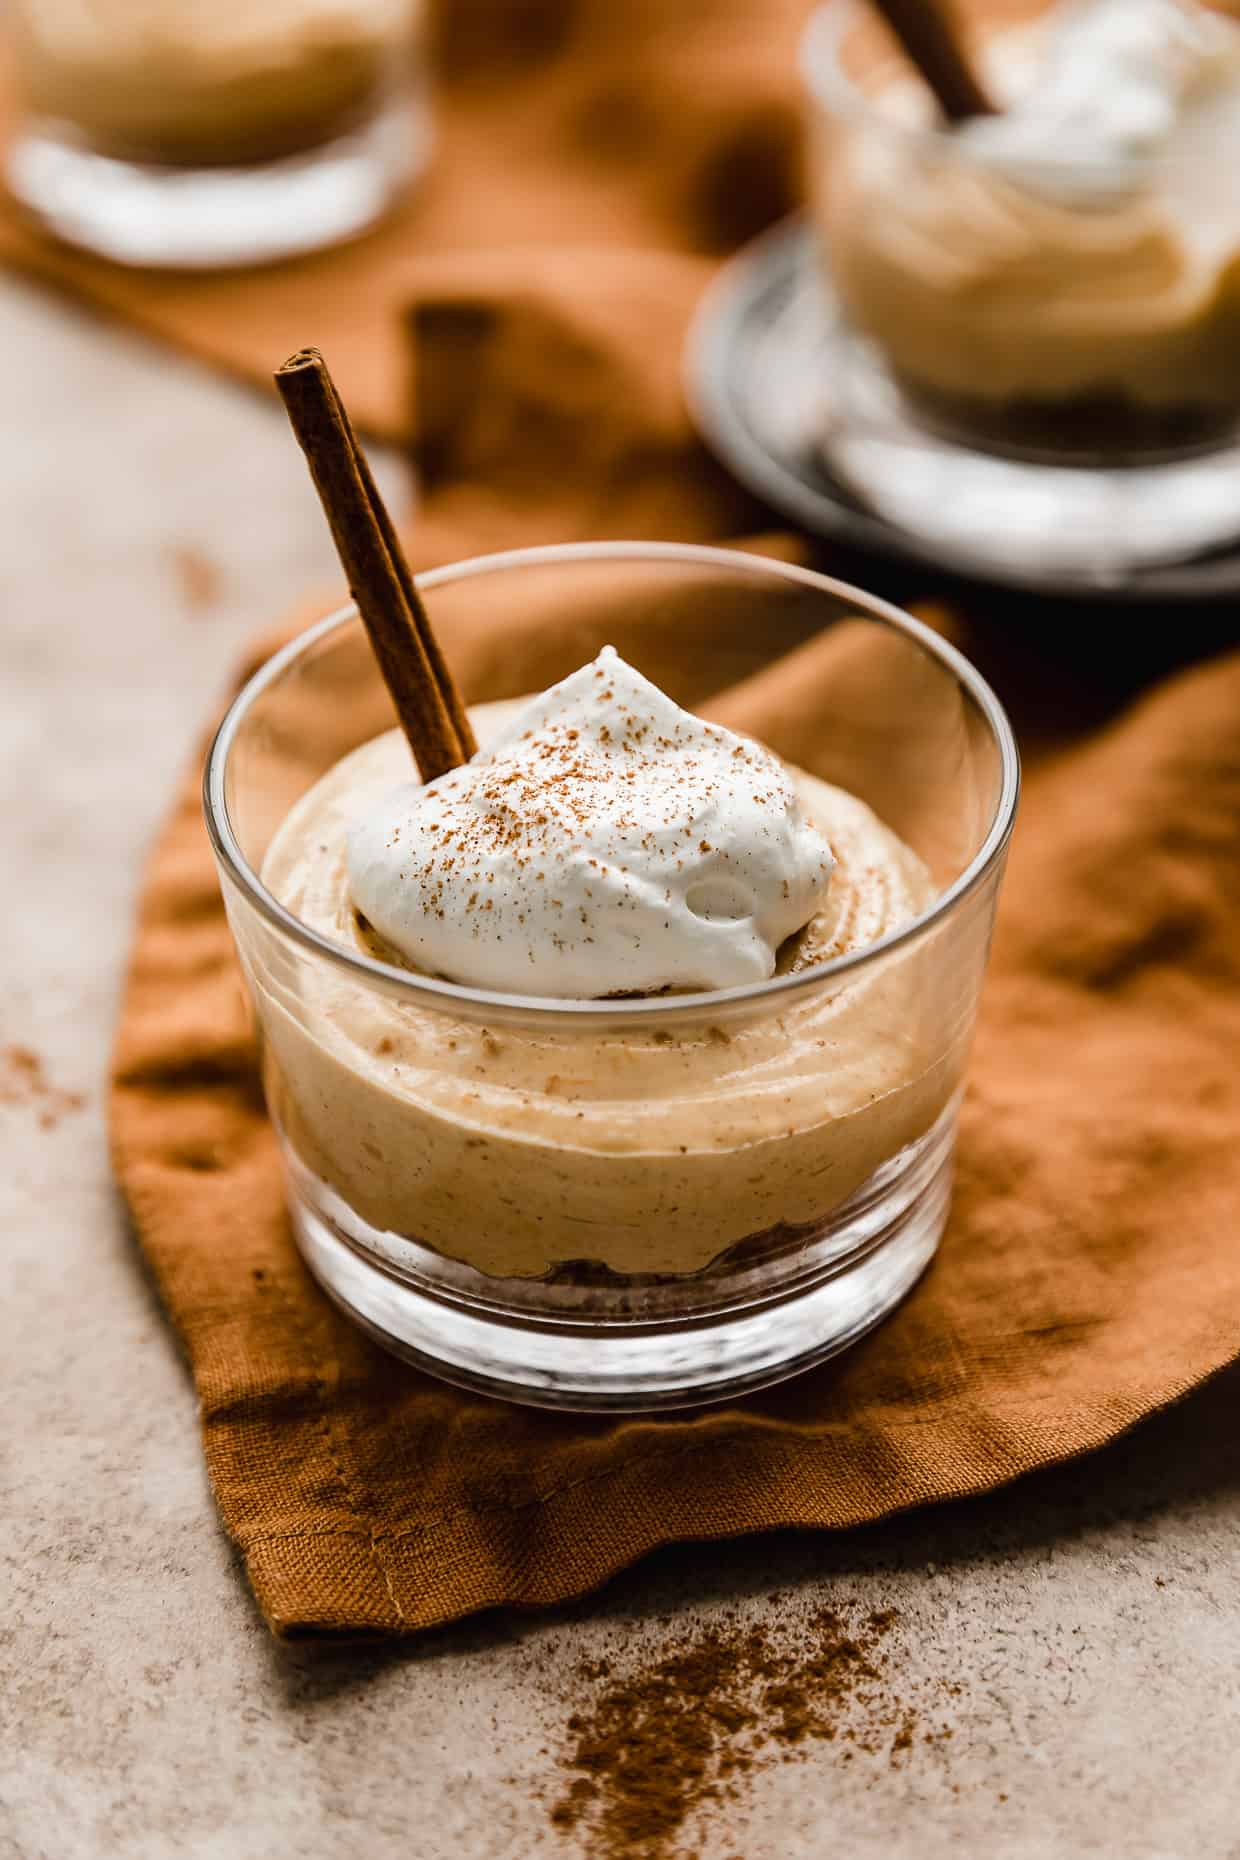 Mini No-Bake Pumpkin Cheesecakes topped with whipped cream in a small glass cup.